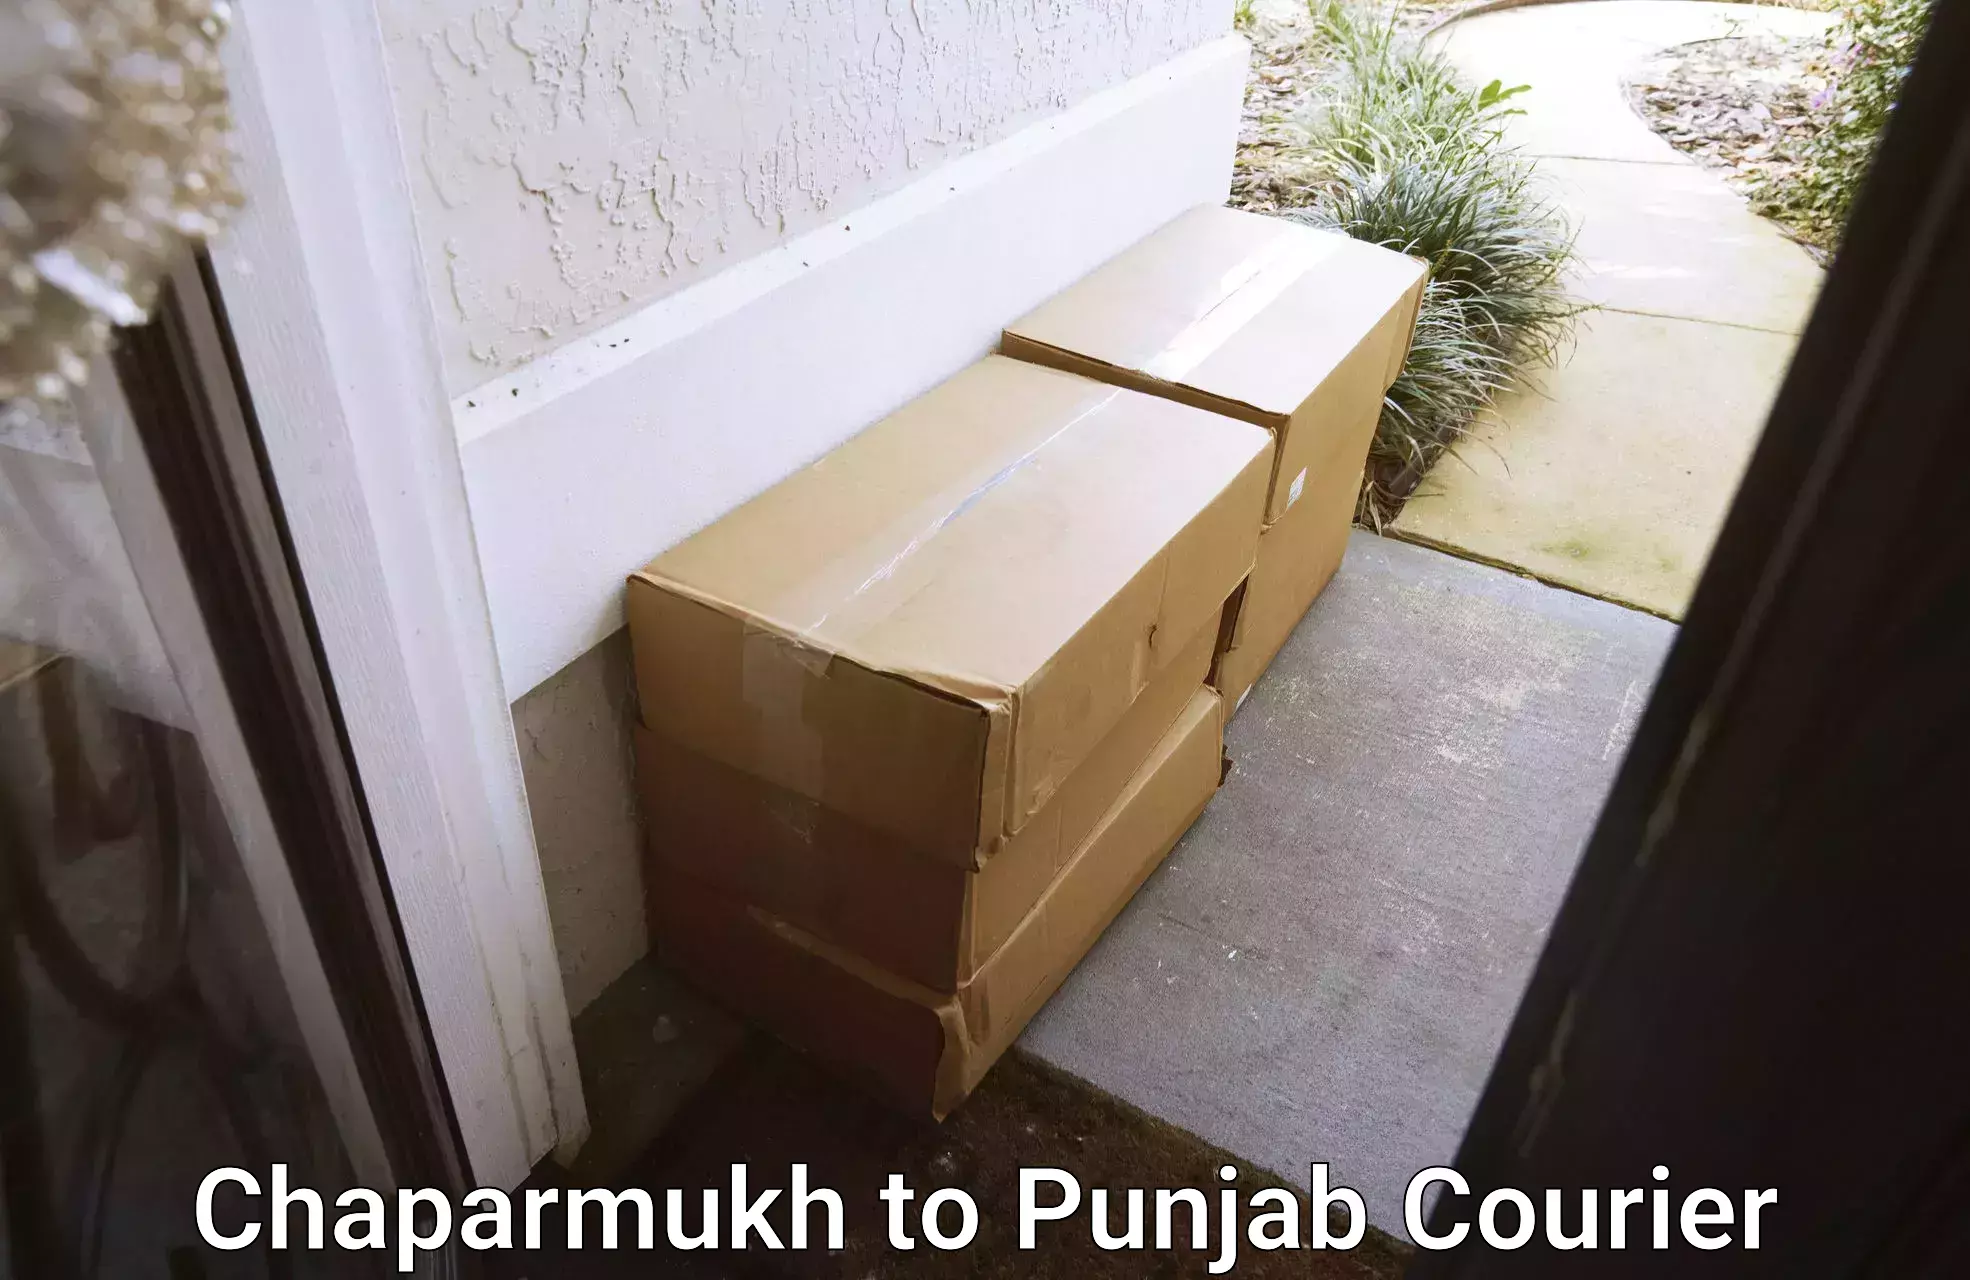 Same-day delivery solutions Chaparmukh to Rajpura